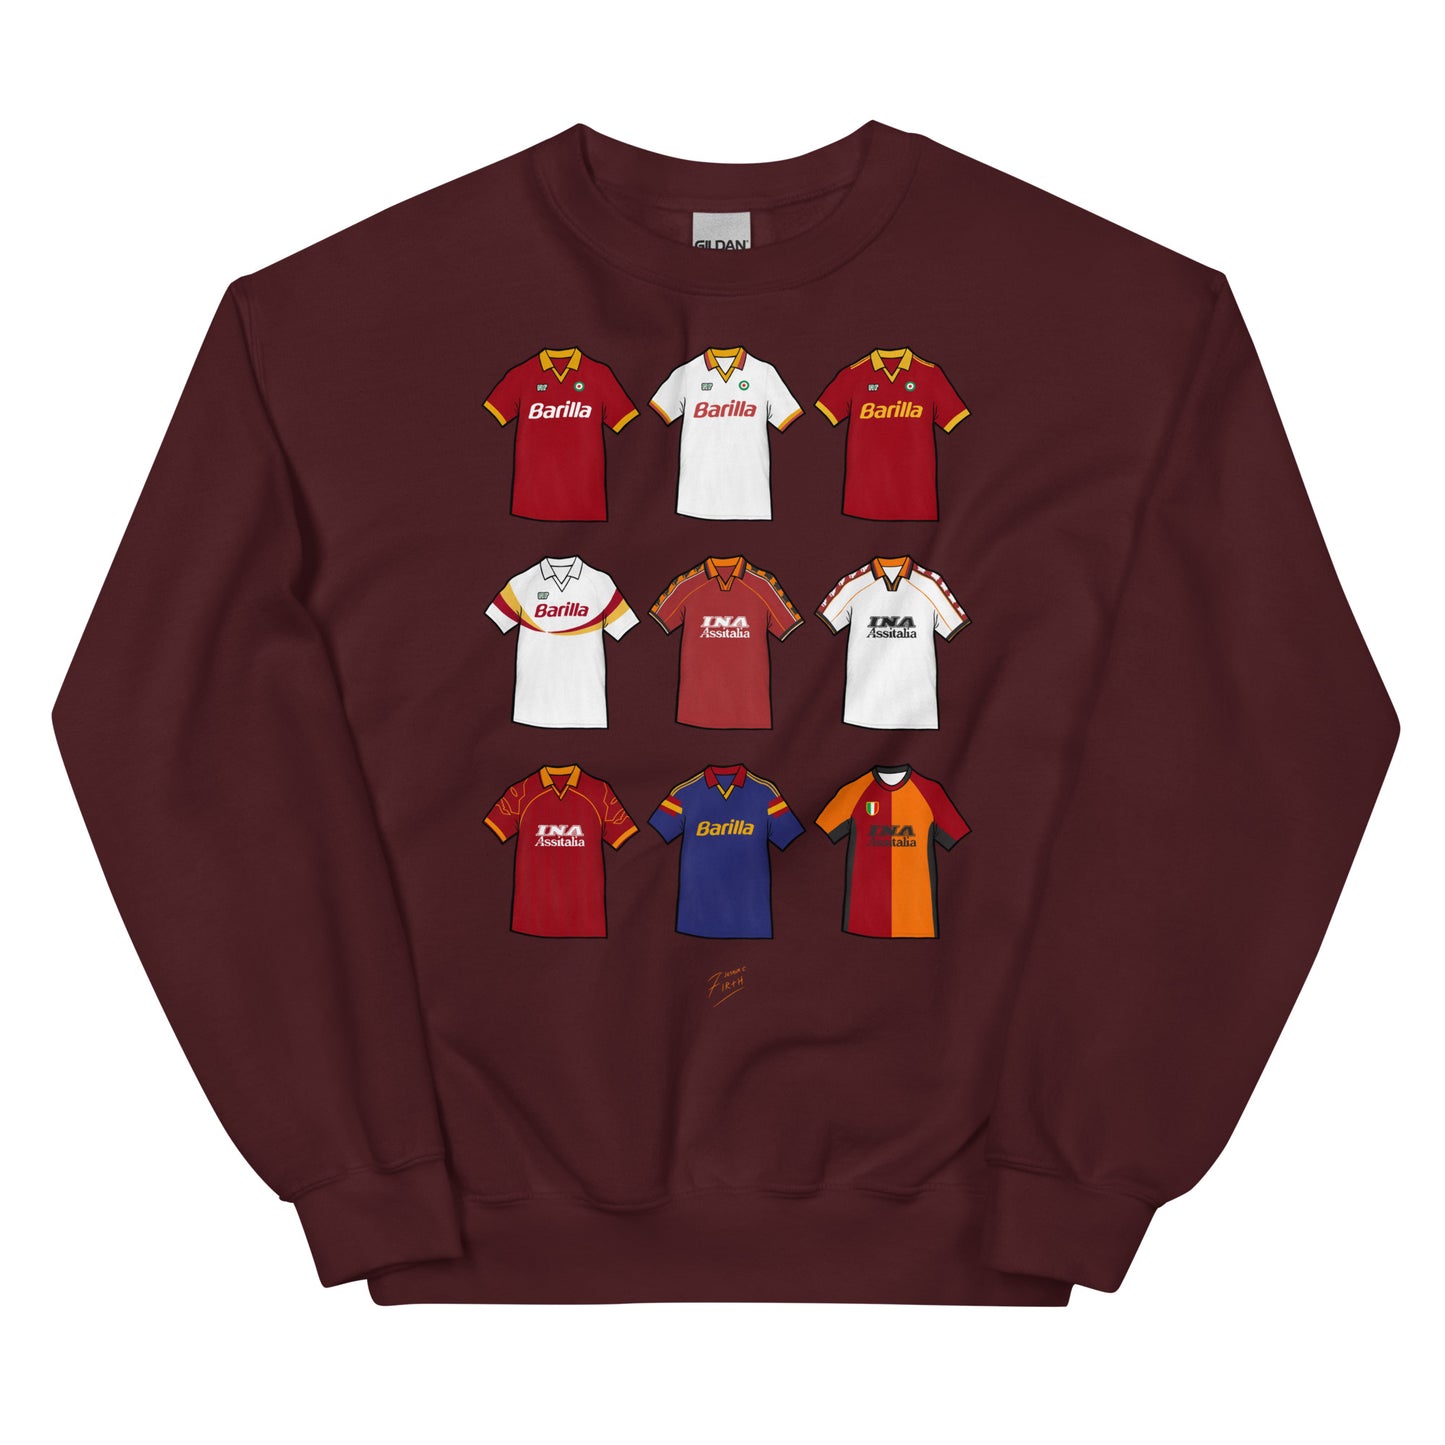 Transport yourself back to the glory days of AS Roma with this vintage-inspired artwork sweatshirt. Featuring iconic jerseys and colours, this unique piece is a must-have for any fan of the legendary Italian football club